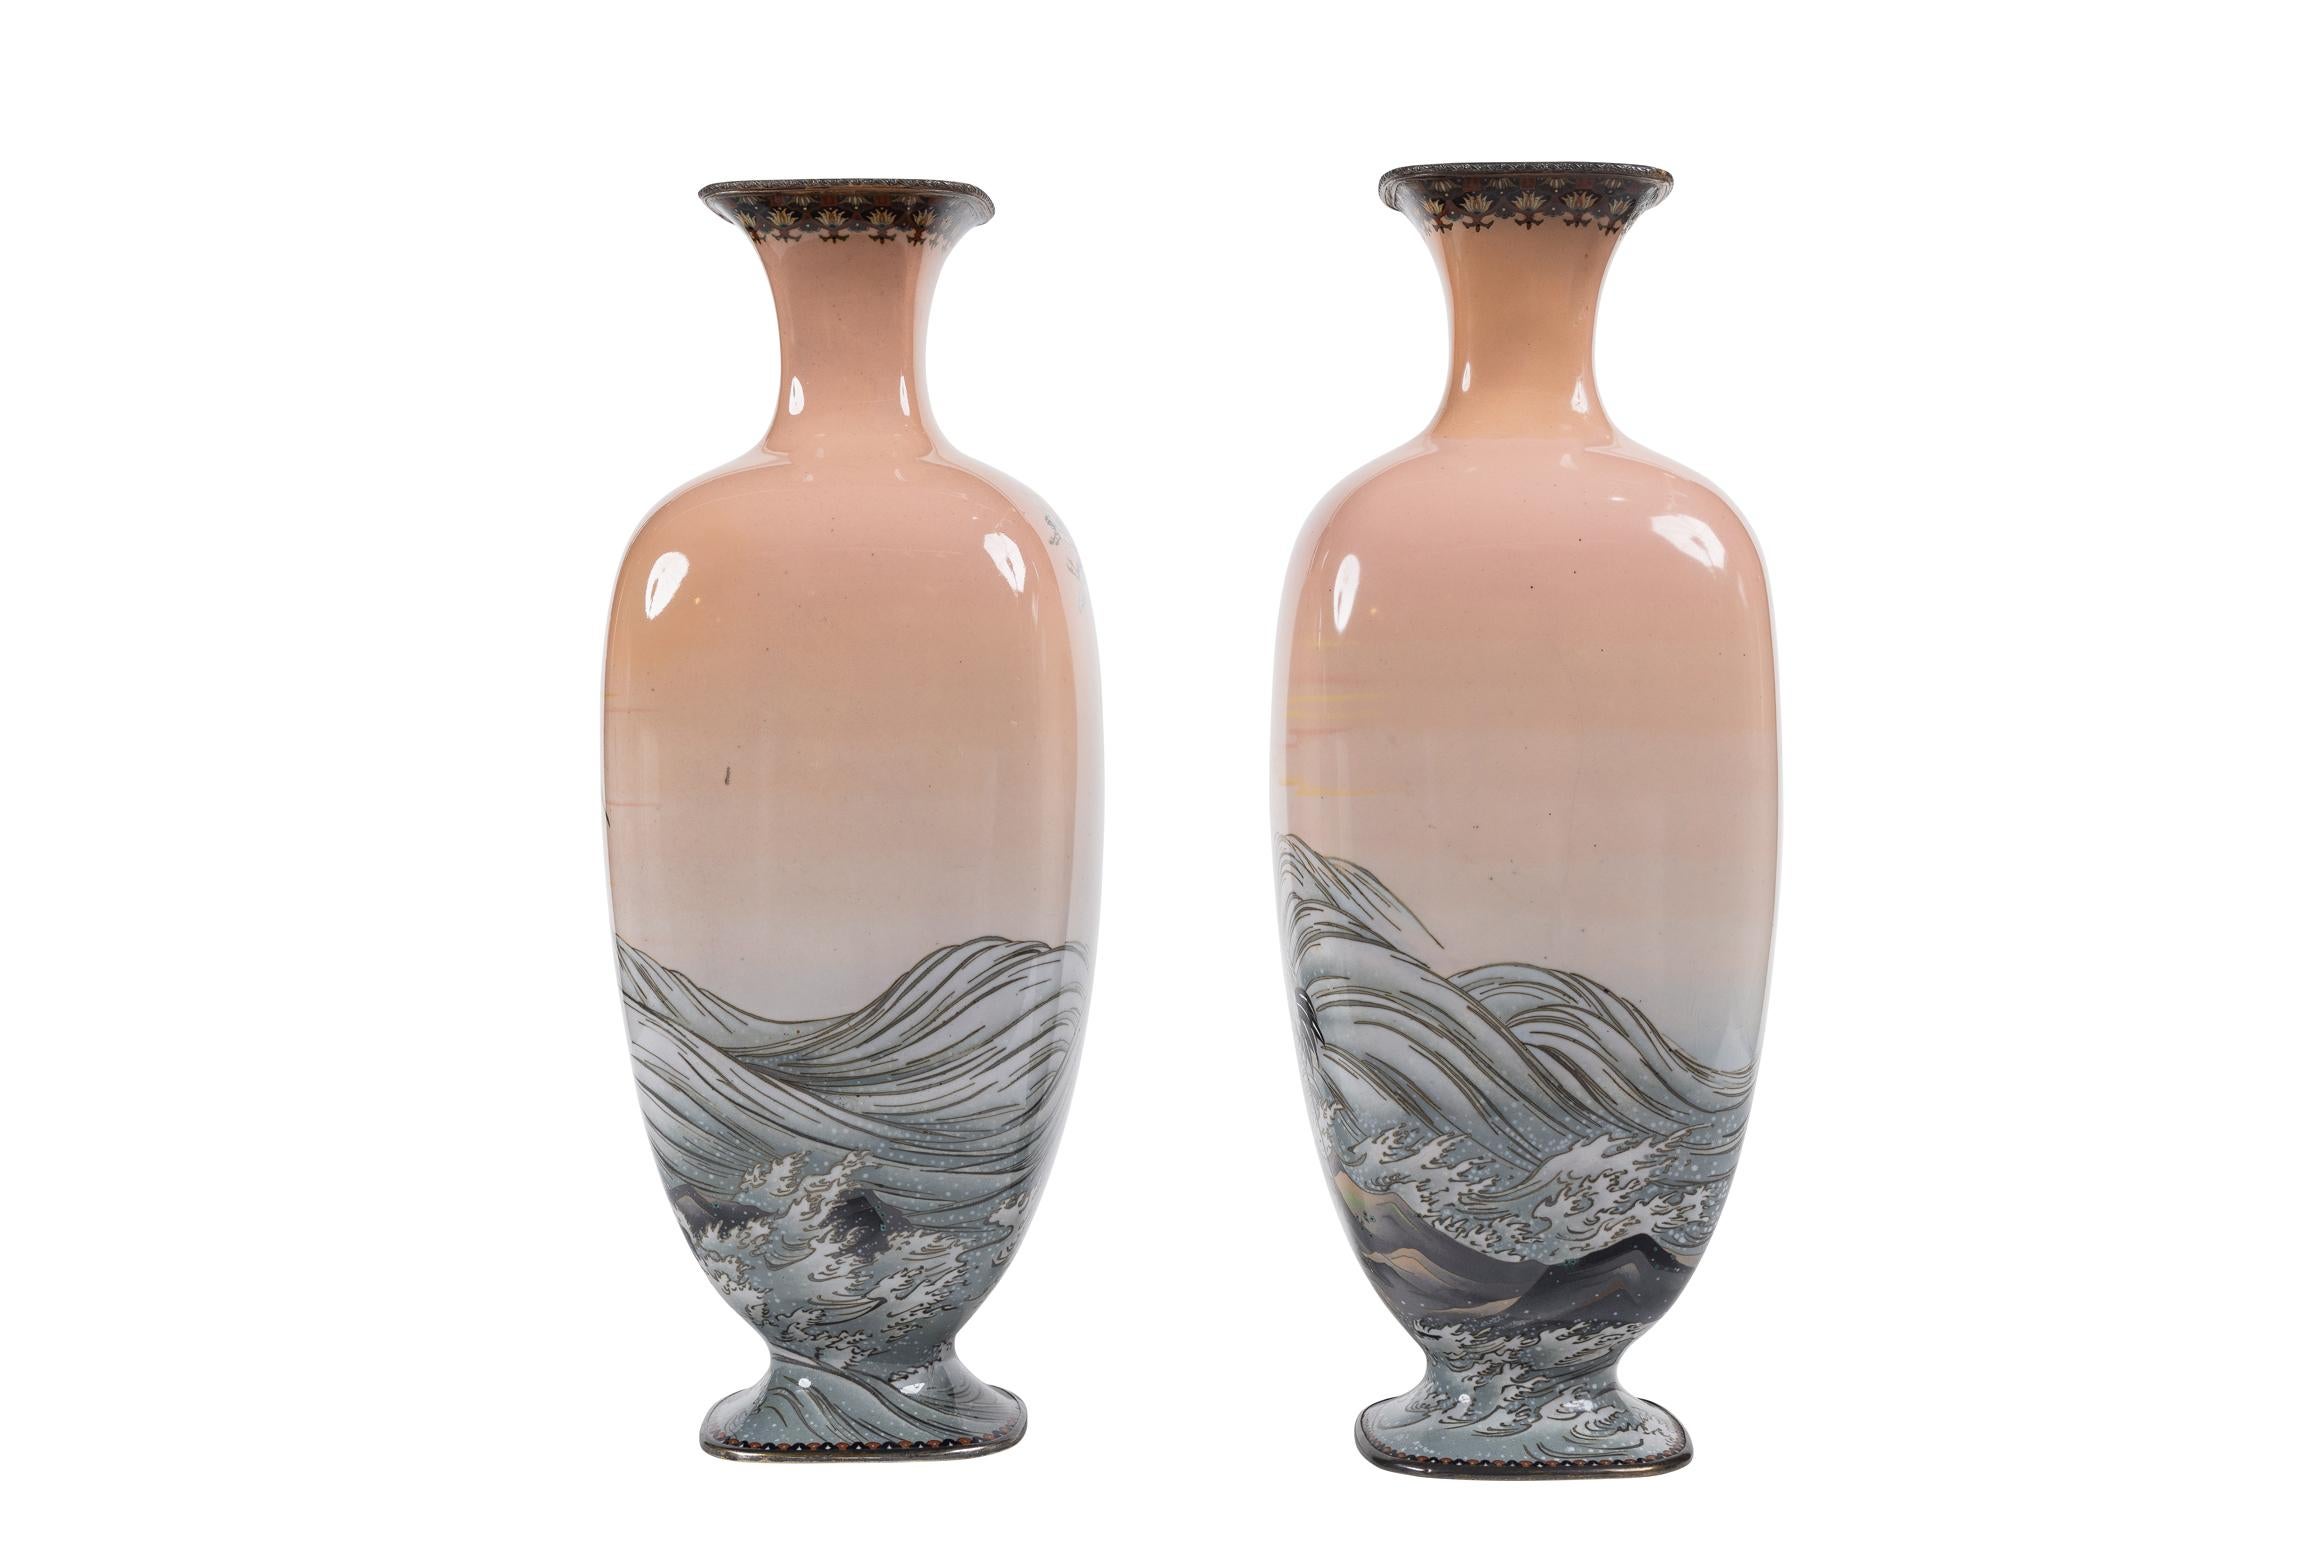 Presenting a truly captivating and highly collectible pair of Meiji Period Japanese Cloisonné Enamel Pink-Ground Vases, attributed to the renowned artist Hayashi Kodenji. These exceptional vases embody the artistry and sophistication of Japanese